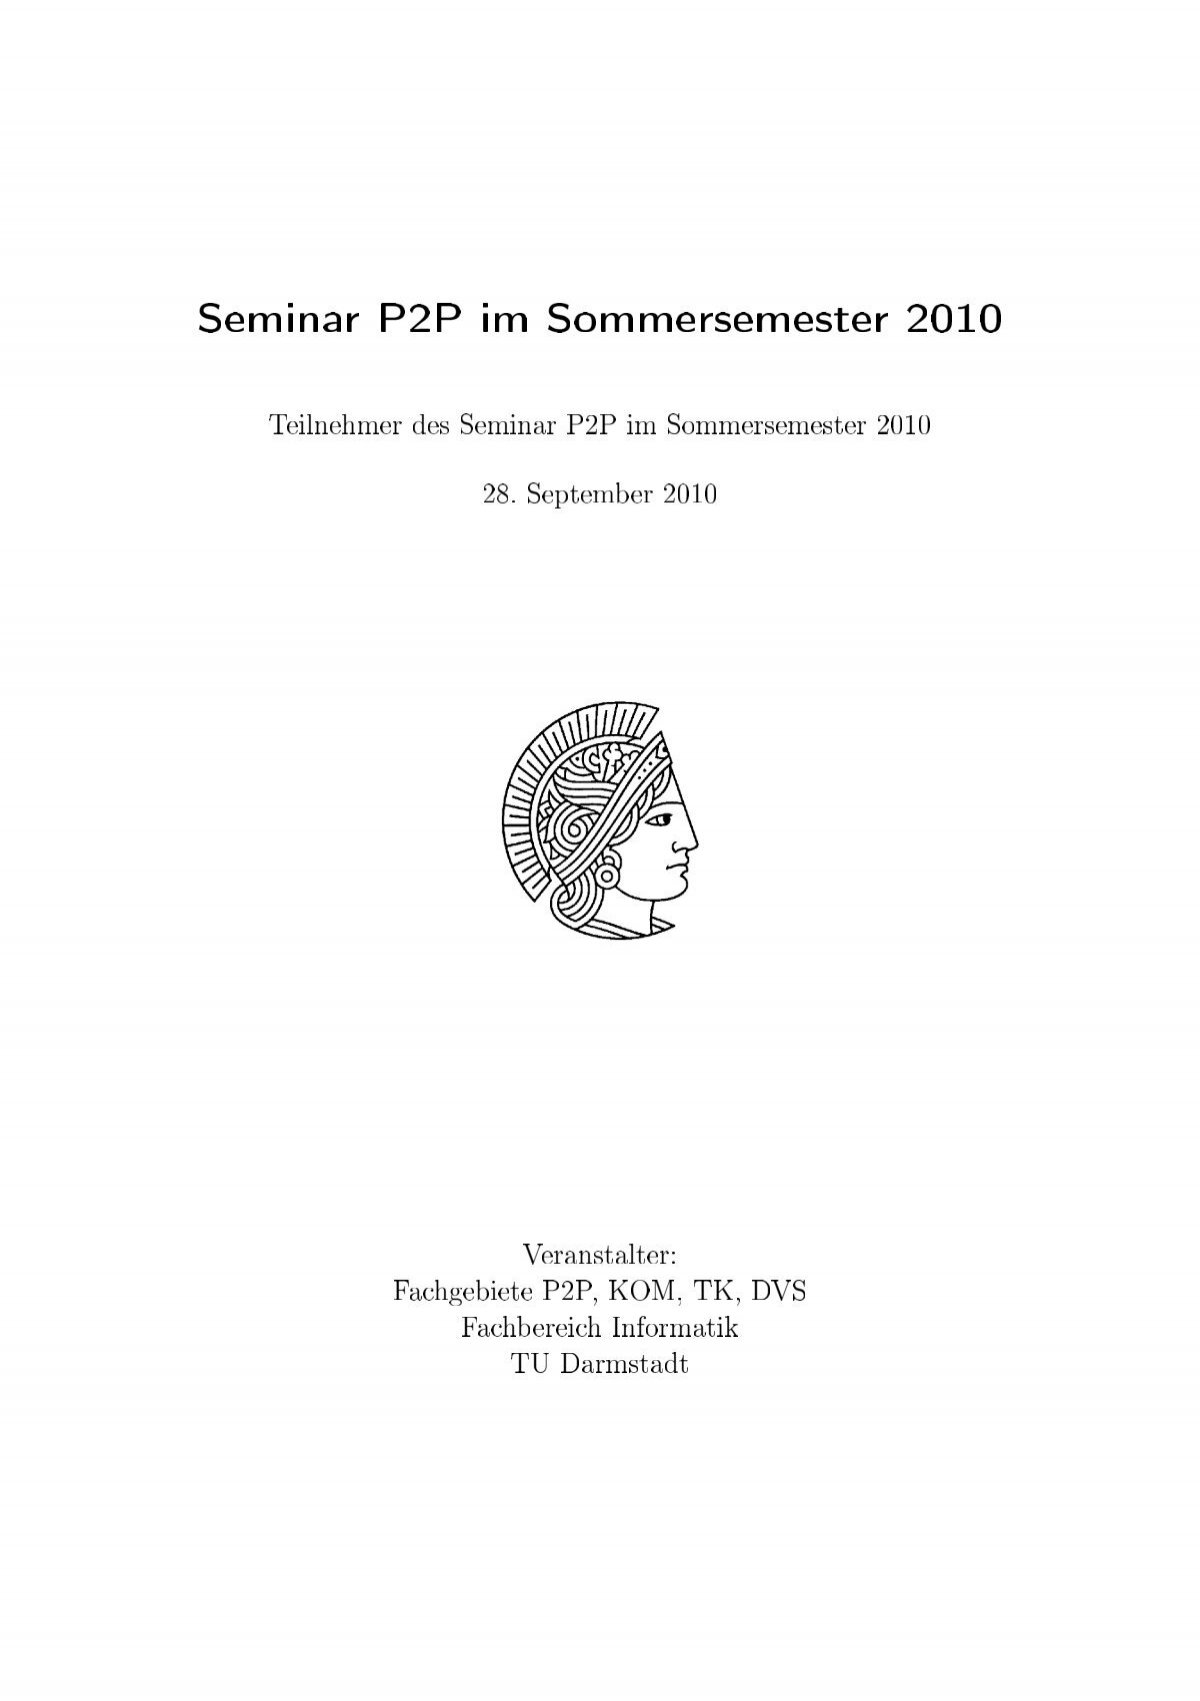 Seminar P2P im Sommersemester 2010 - P2P Networks Group